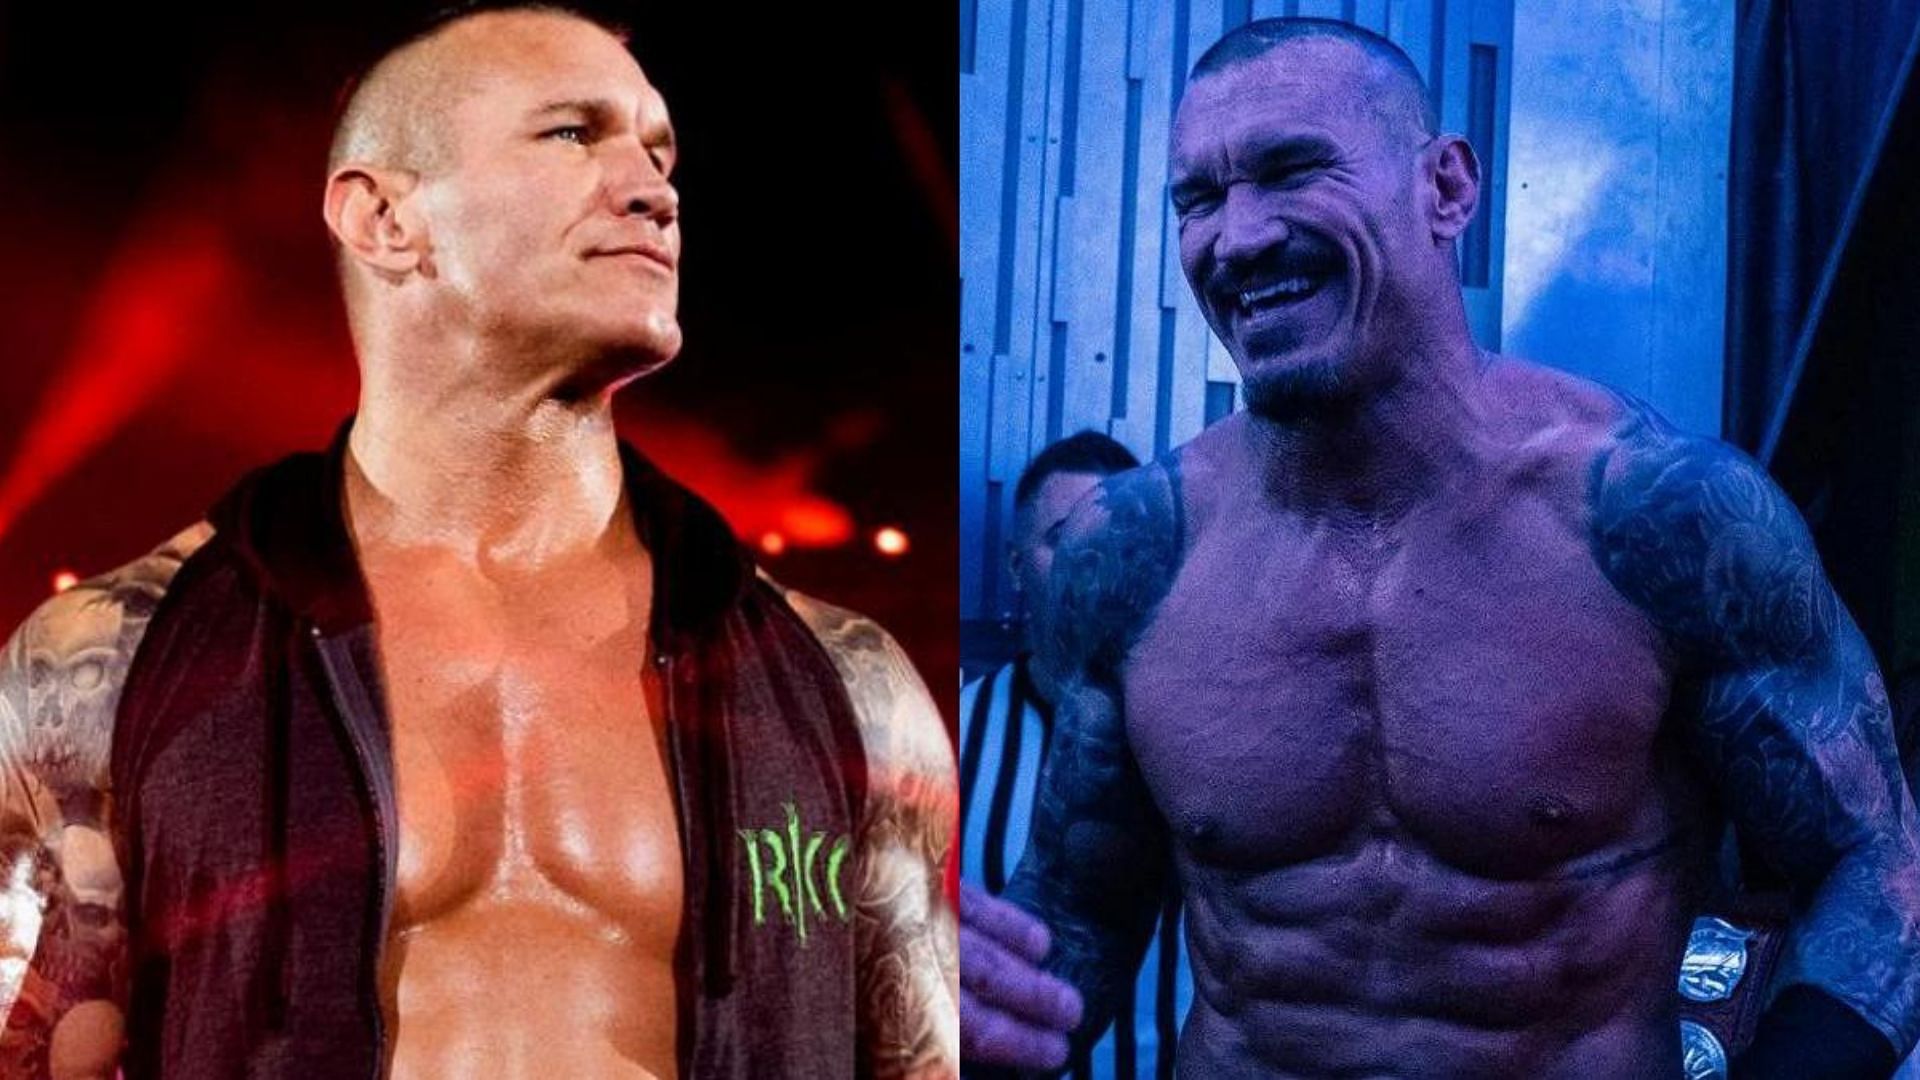 Randy Orton is reportedly set to make his return in the near future